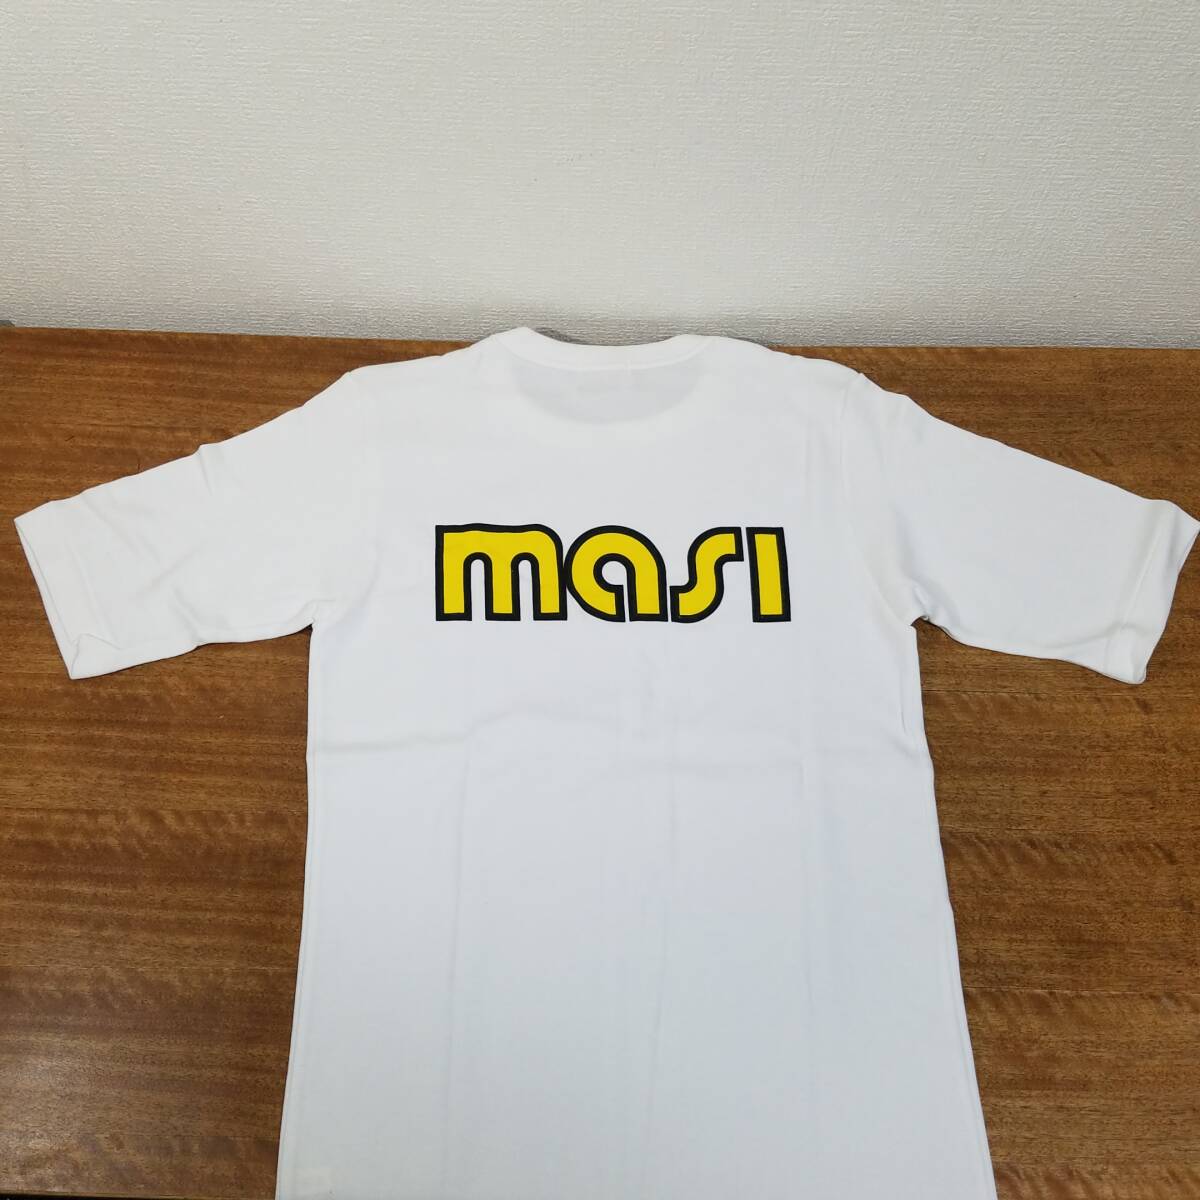 masi Tシャツ(М)　MADE IN JAPAN PEARL IZUMI CYCLE WEAR 　New Old Stock (NOS) 未使用品 ビンテージ_画像2